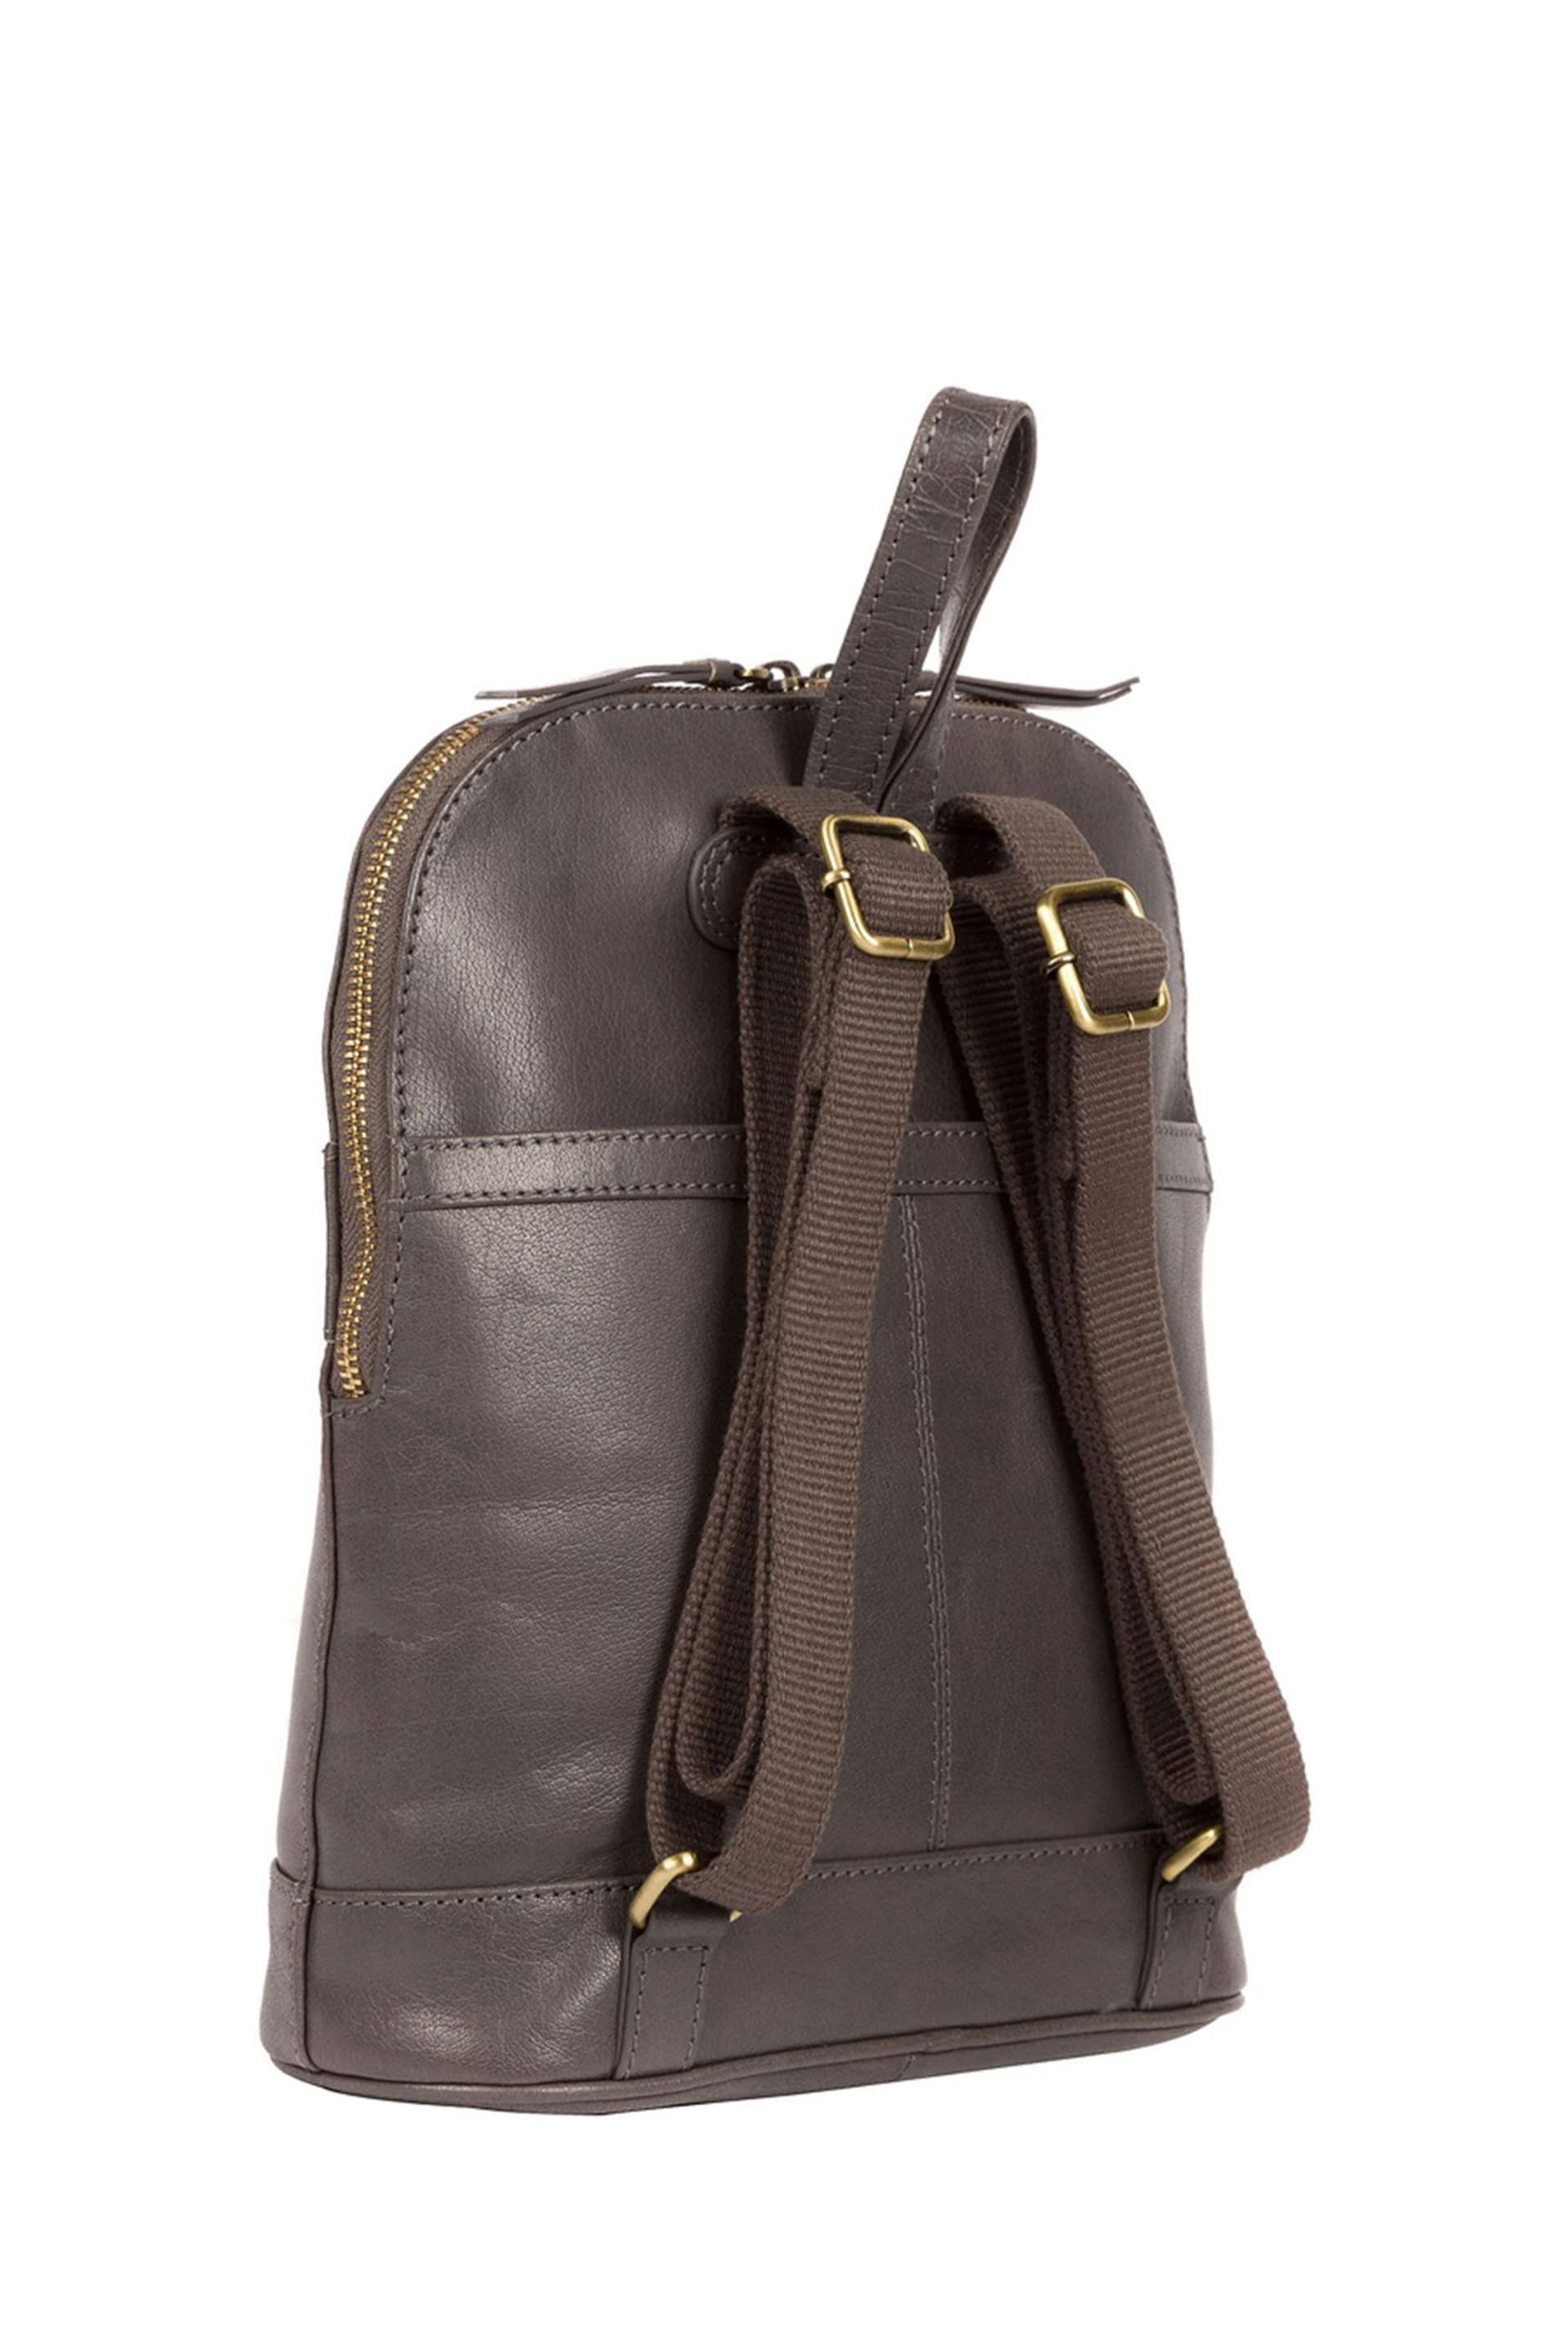 Conkca Francisca Leather Backpack - Image 2 of 5